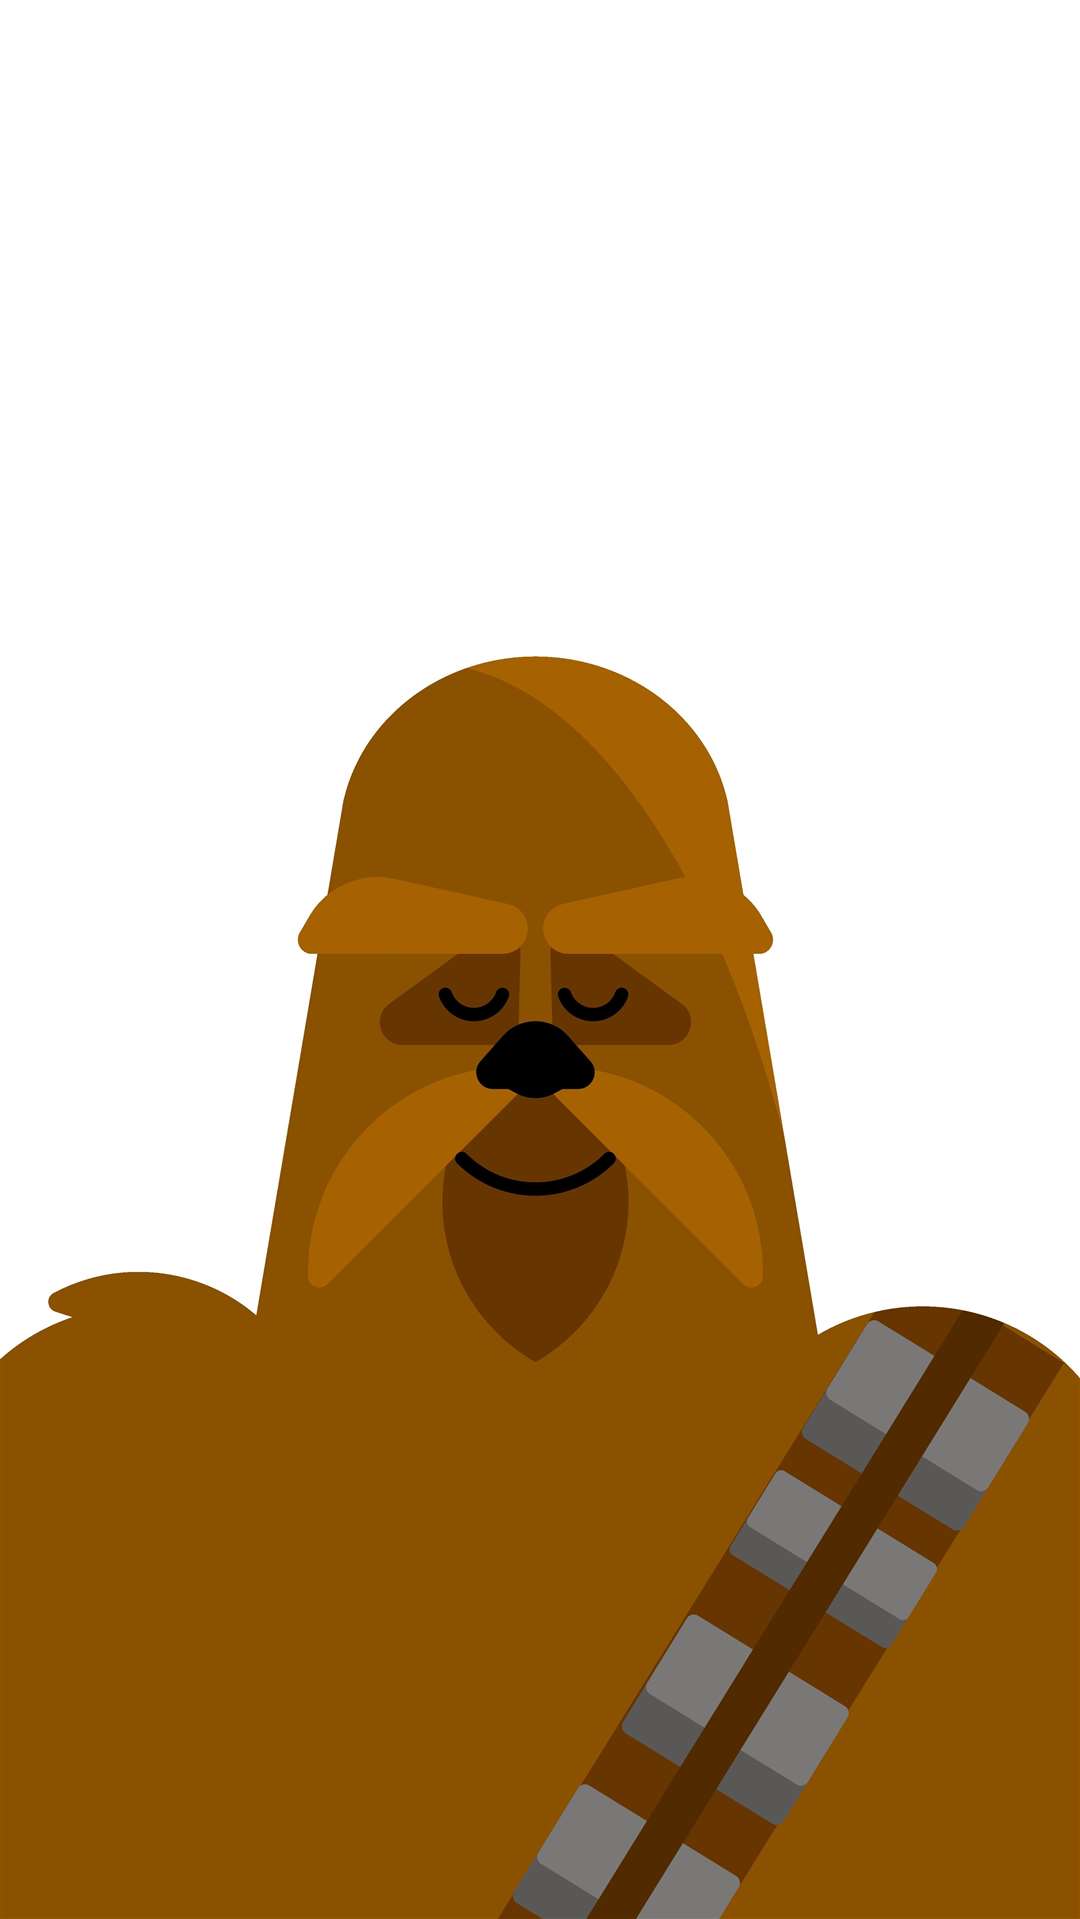 Chewbacca might help you step back and provide some calm so you can go from the 'dark side' to the 'light side'.